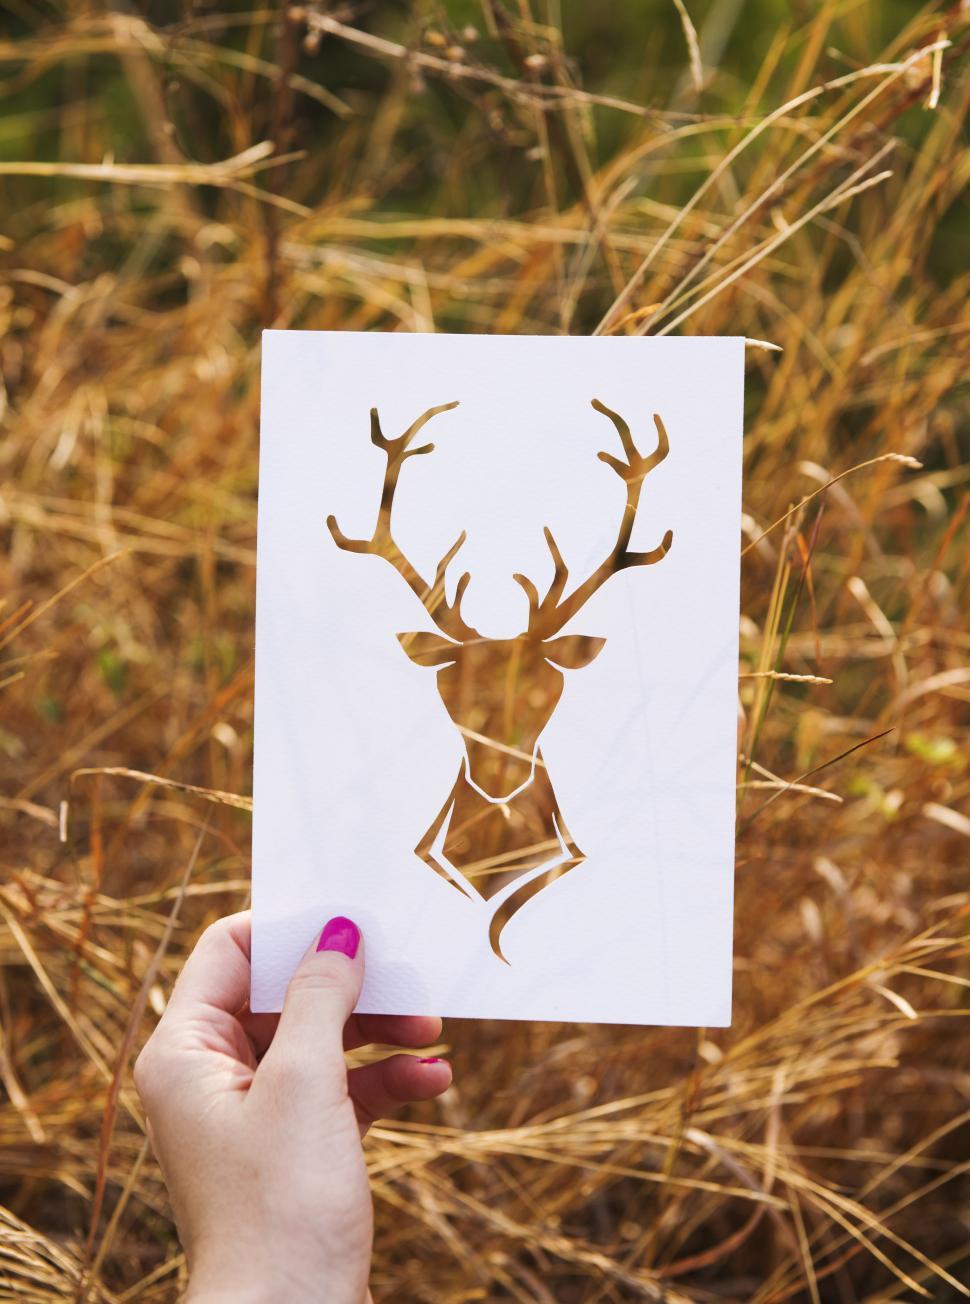 Free Image of Hand Holding up a Deer Picture 